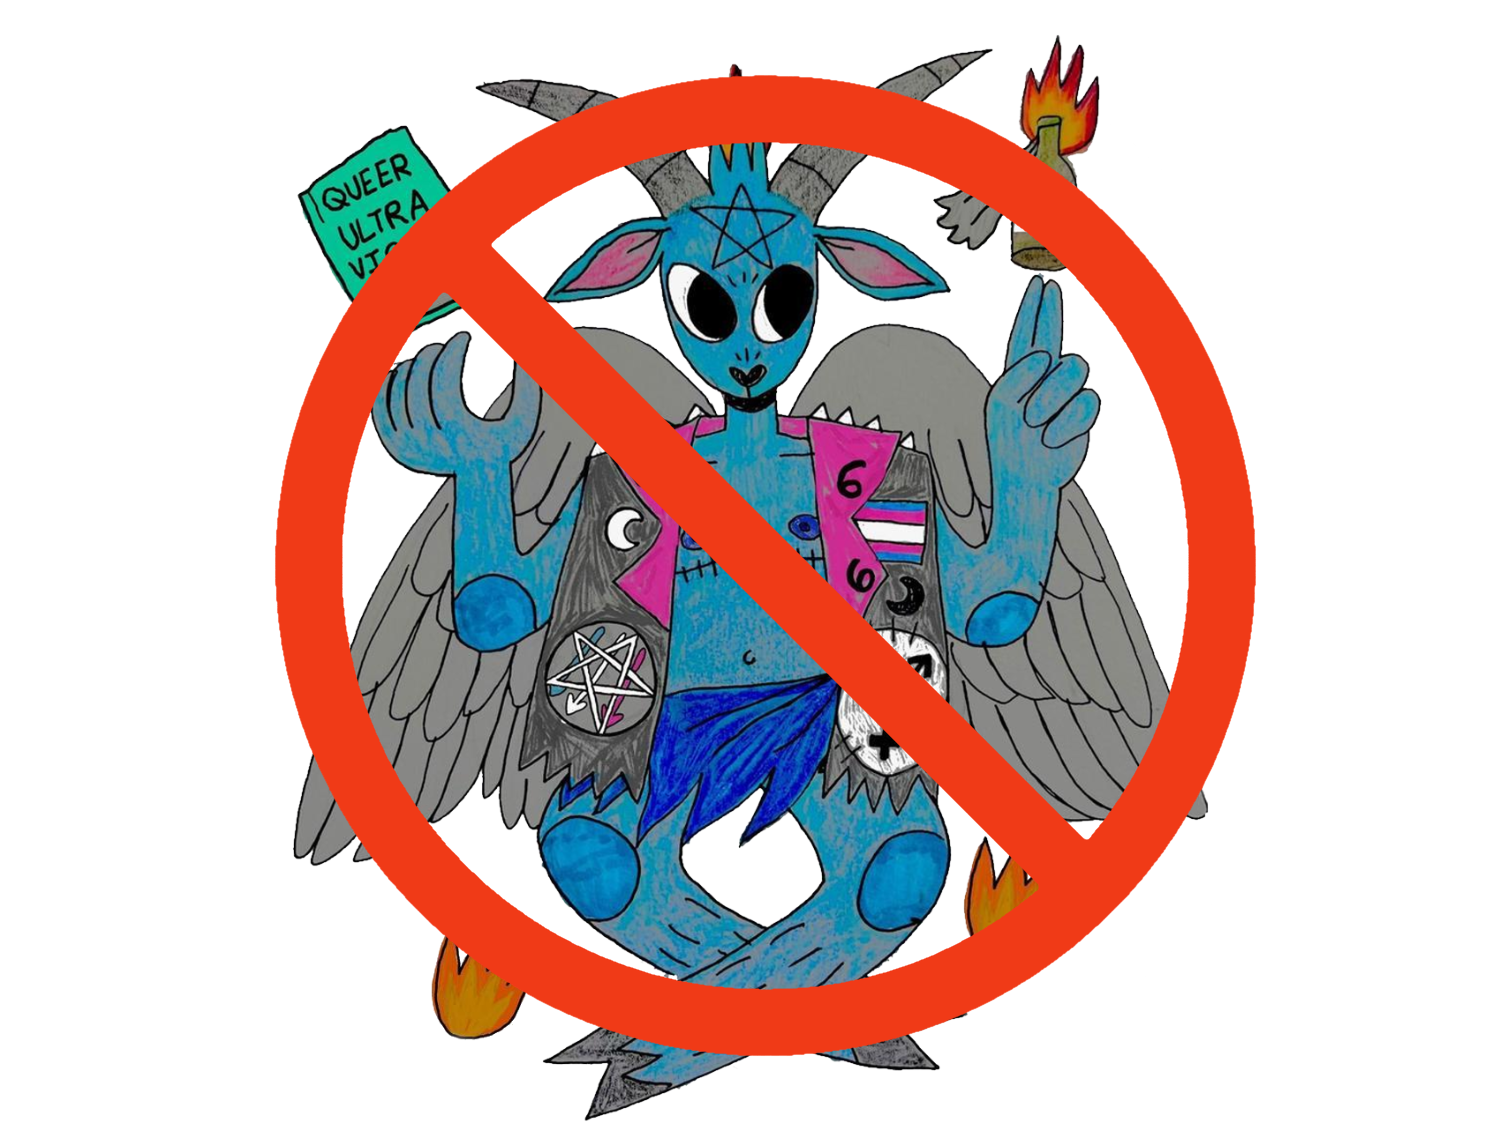 Hail Lucifer The Light Bringer: Archbudzar illustration of blue Baphomet figure with top surgery scars and wings wears a punk battle vest with trans pride flag, trans symbol, and satanic antifascism patches. Floating above one hand is “Queer Ultraviolence” the Bash Back! anthology book while floating above the other hand is a lit Molotov cocktail with a leviathan cross / sulfur symbol on it. Fire also comes from the top of Baphomet’s head like the traditional famous “Sabbatic Goat” illustration